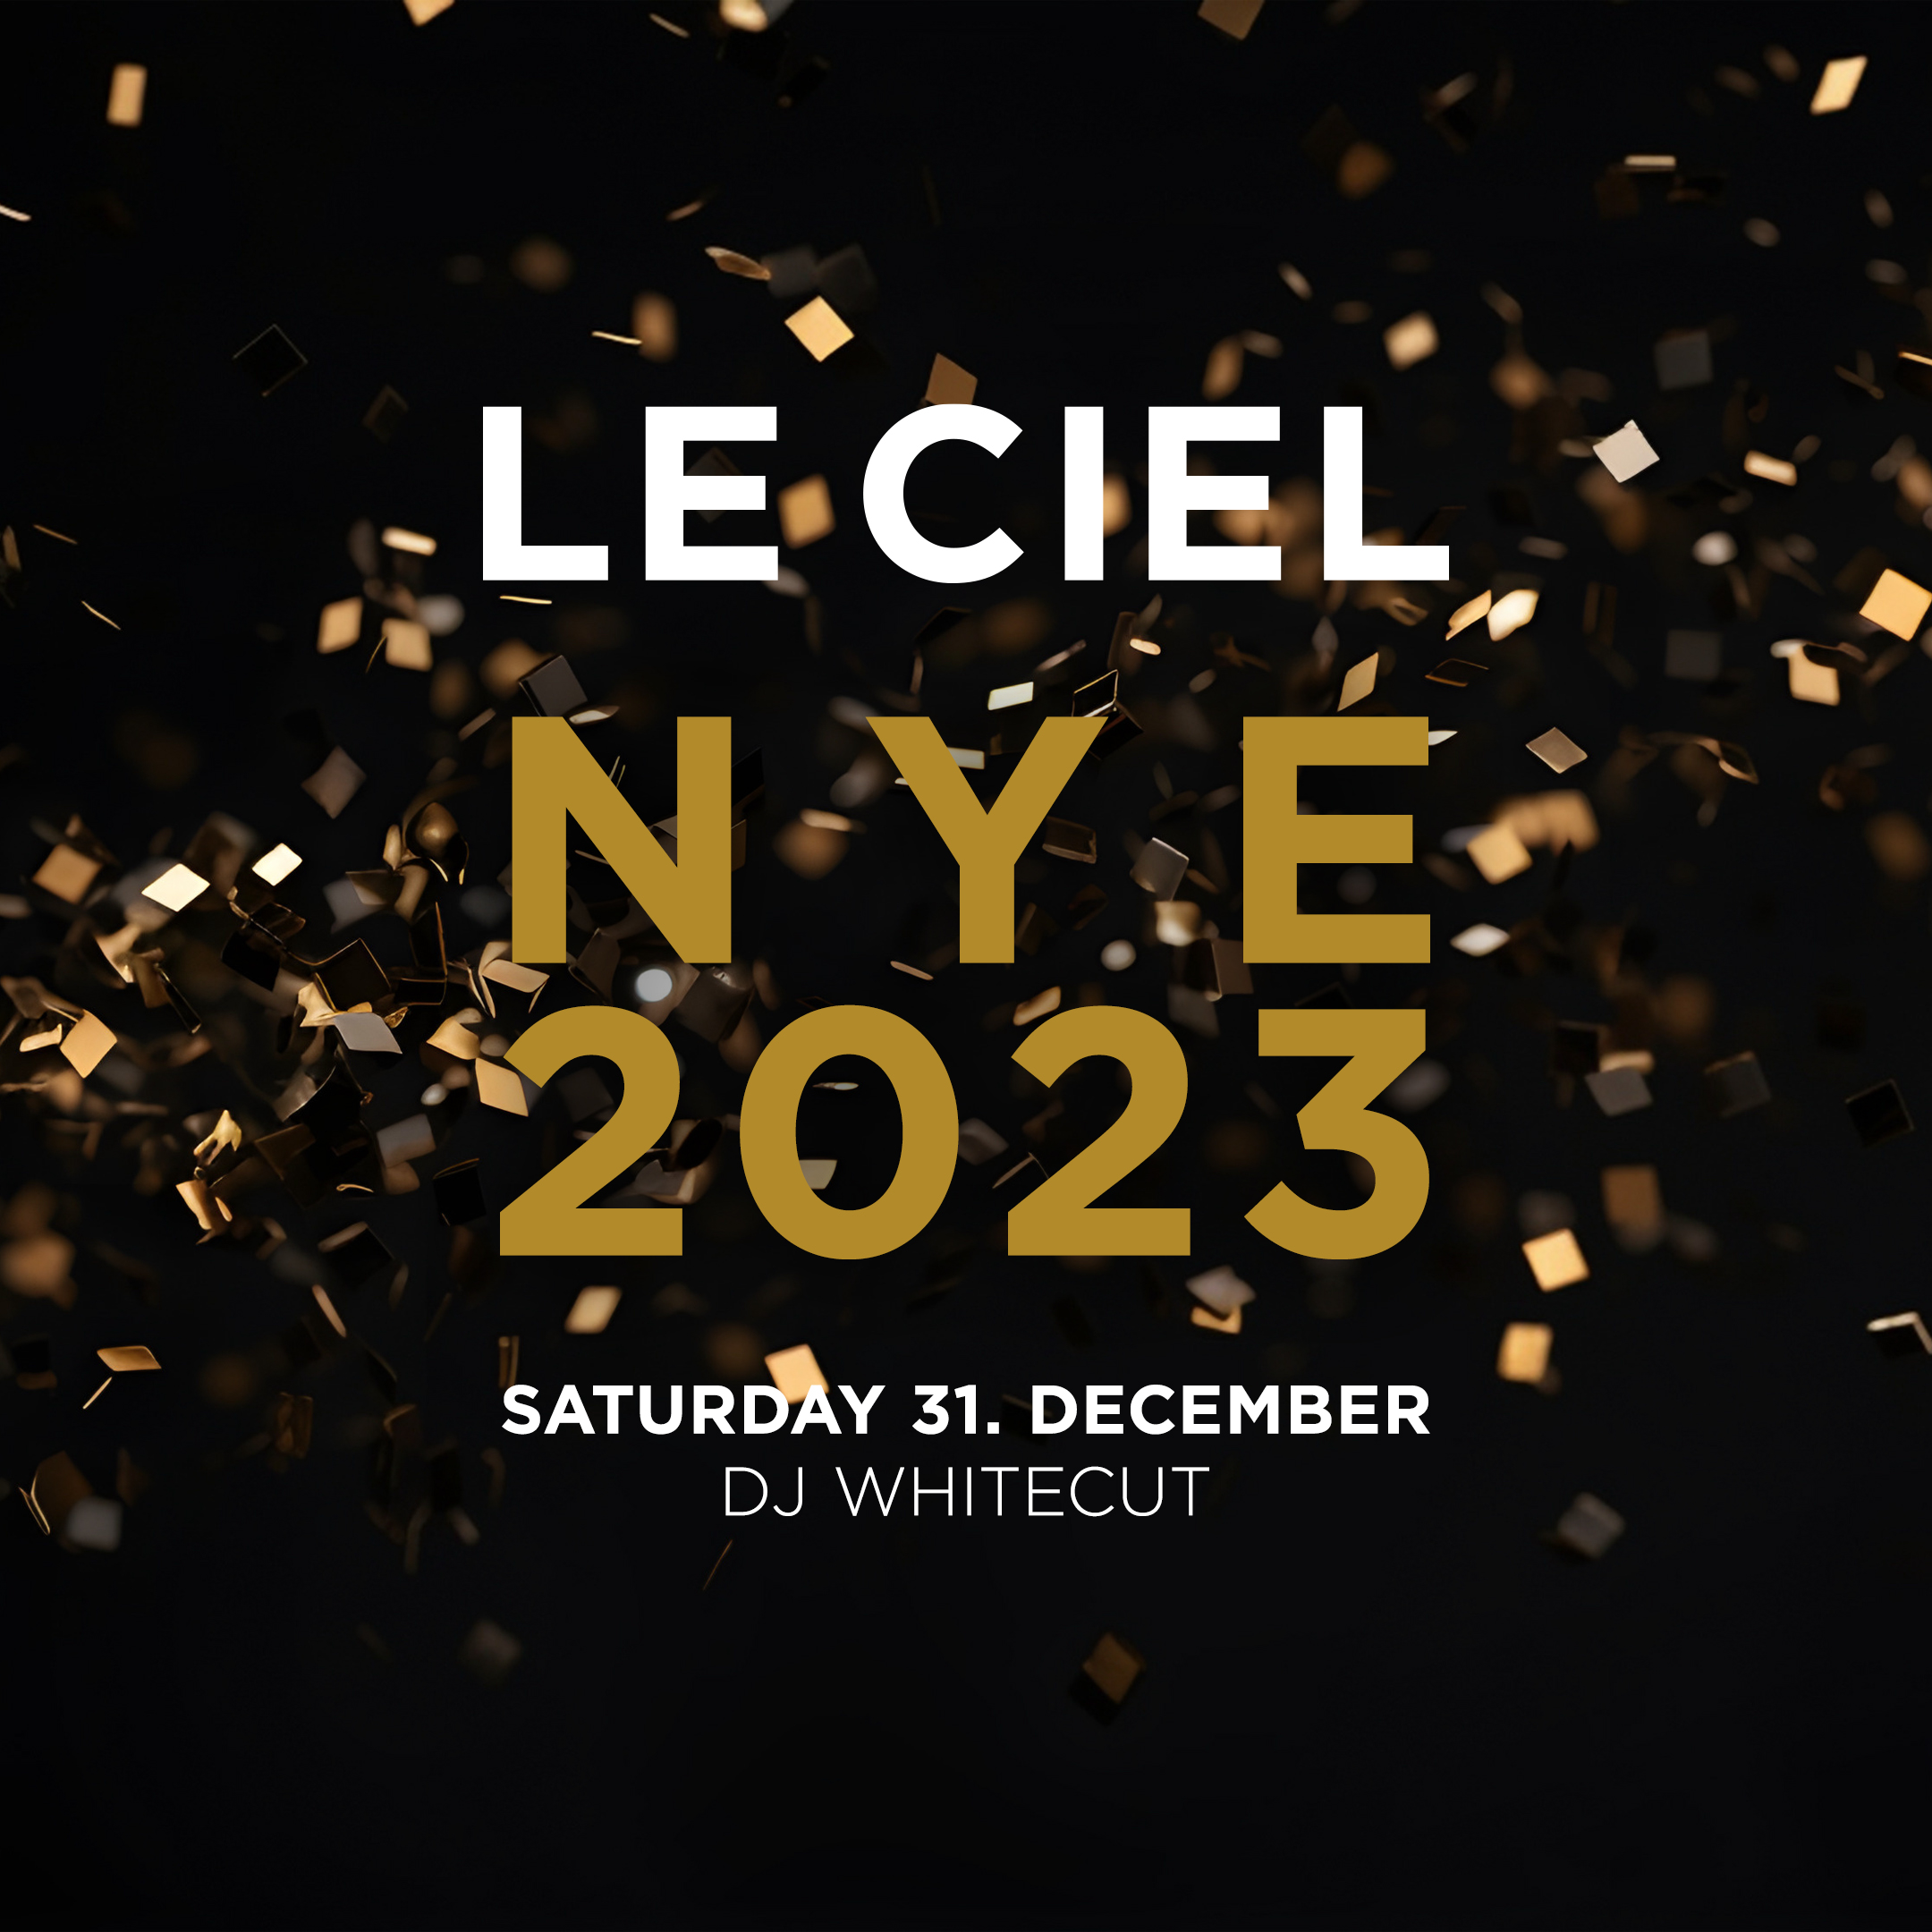 NEW YEAR'S EVE 2023 Flyer